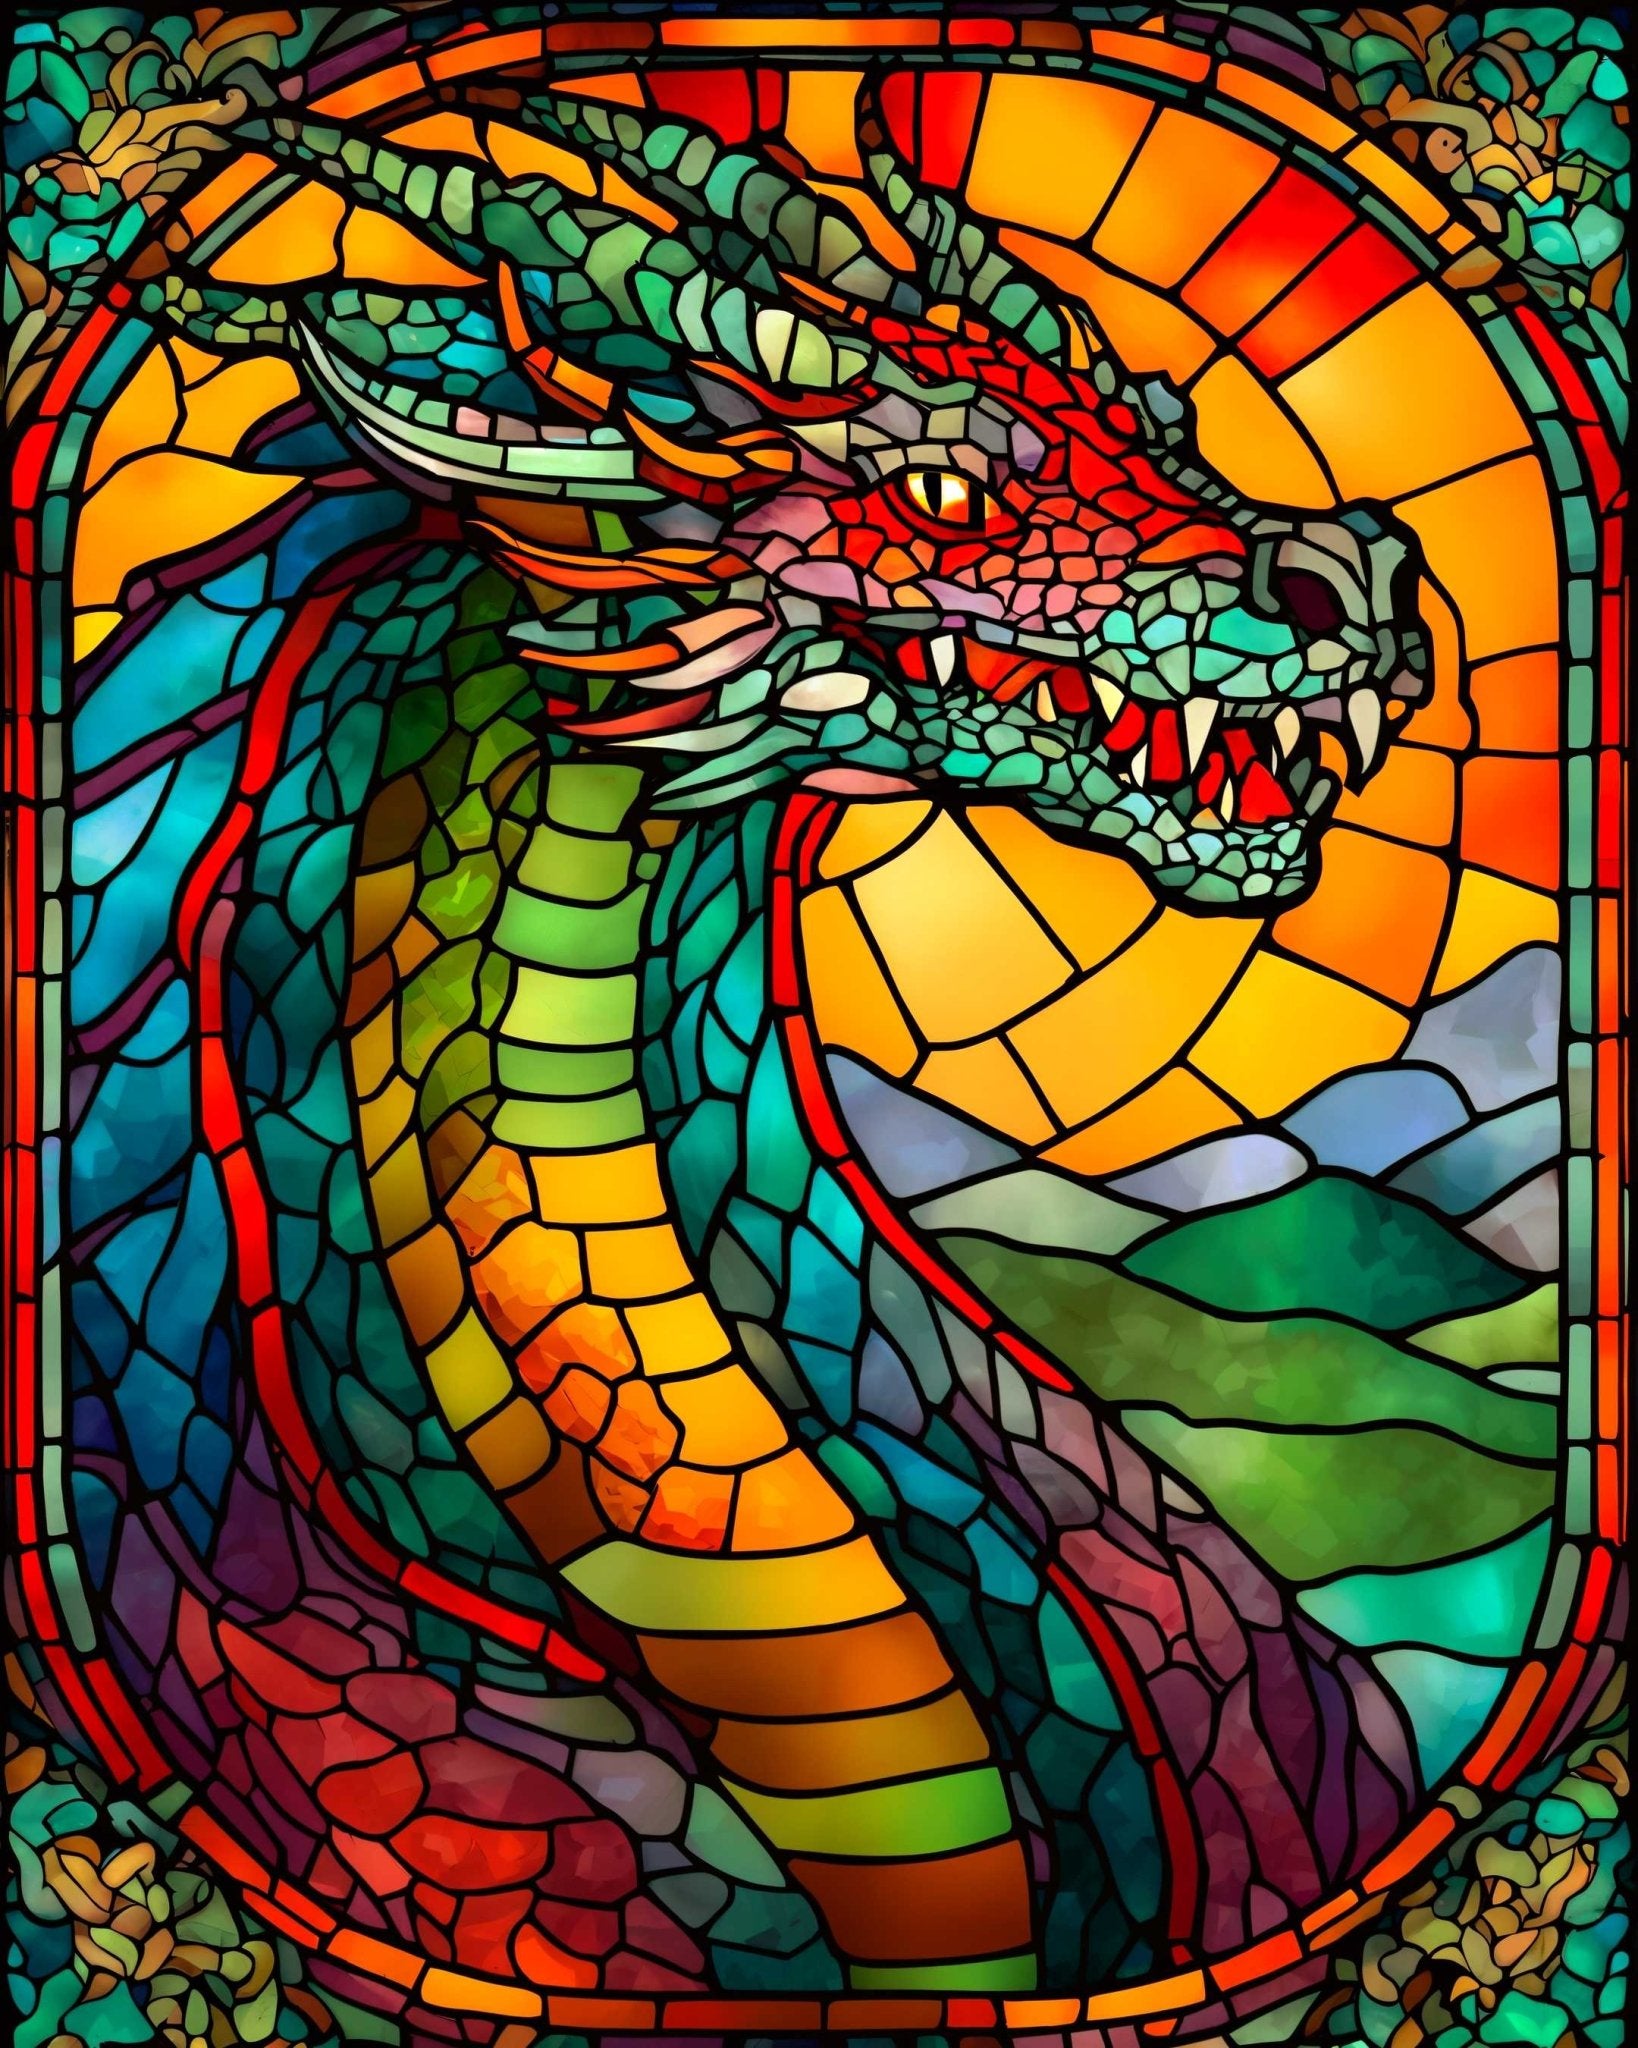 Rainbow dragon - Poster - Ever colorful